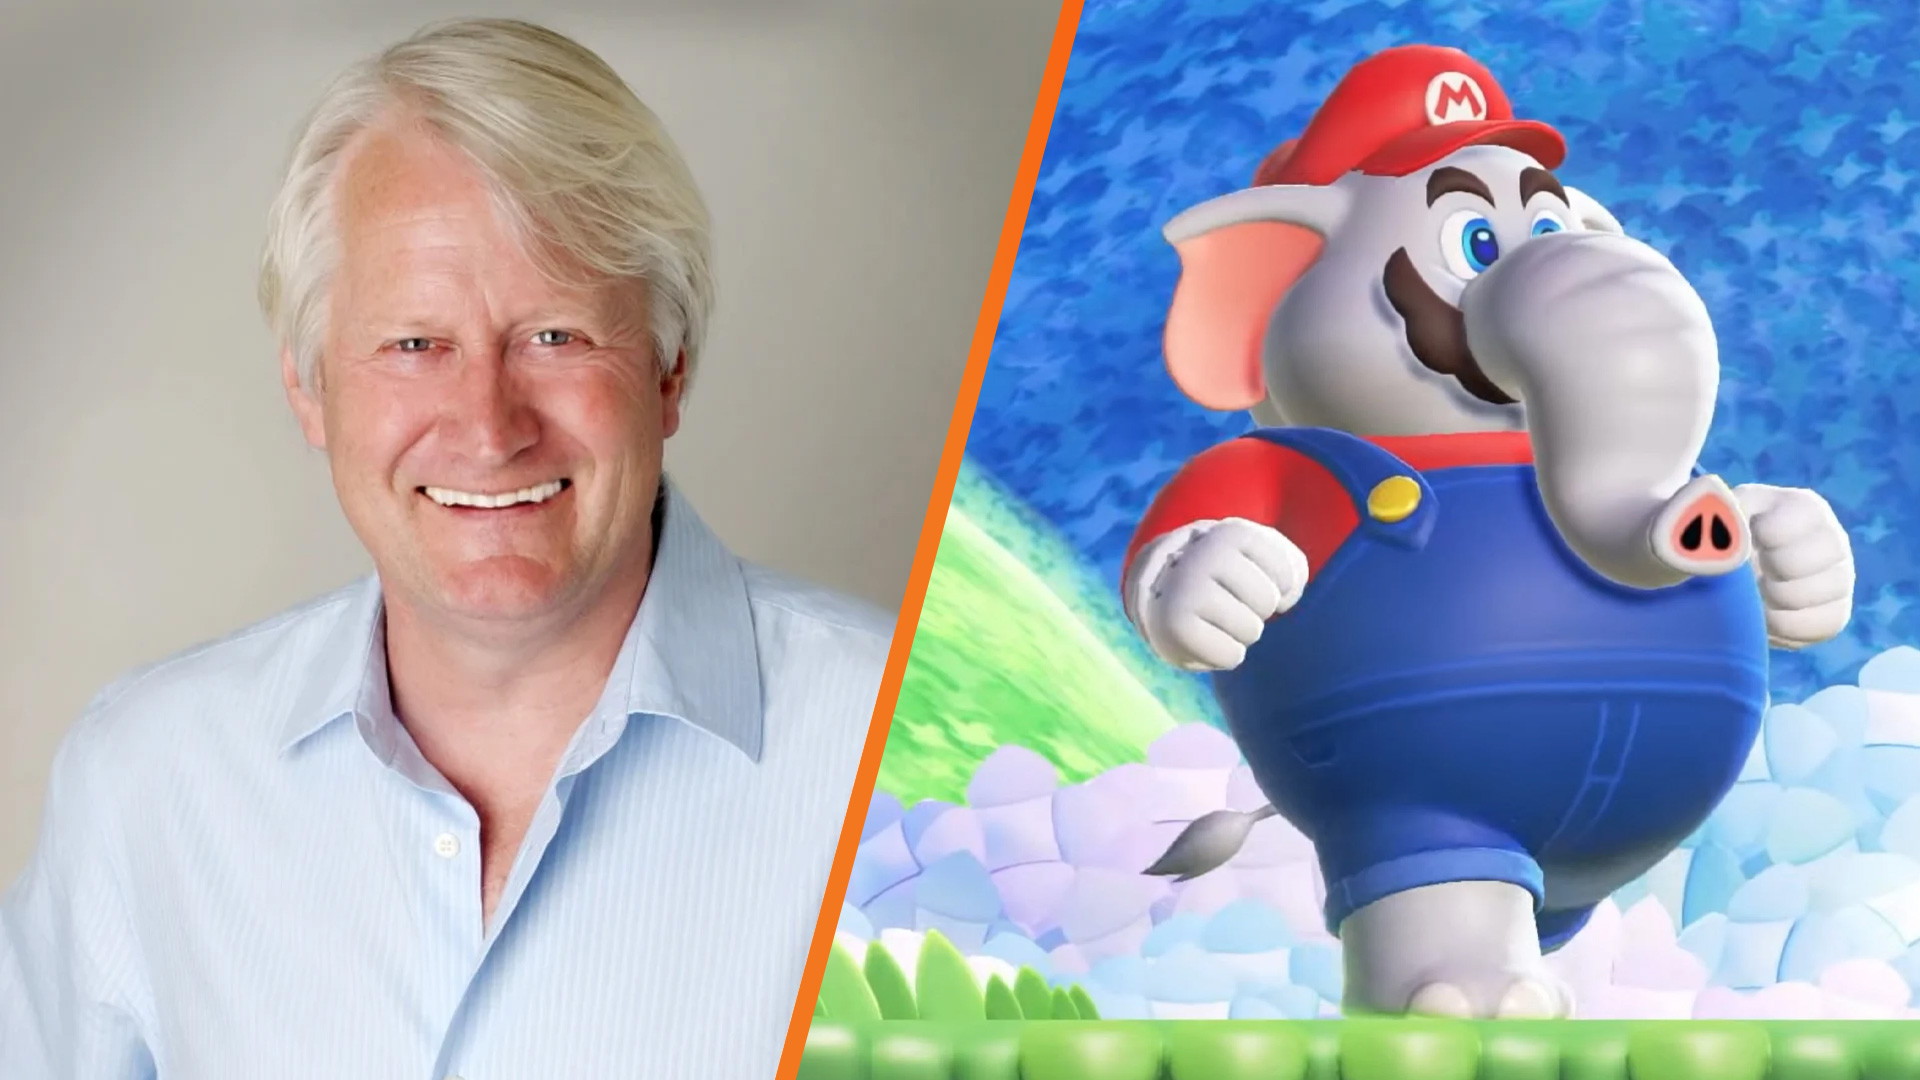 Mario's New Voice Actor Announced by Nintendo After Charles Martinet